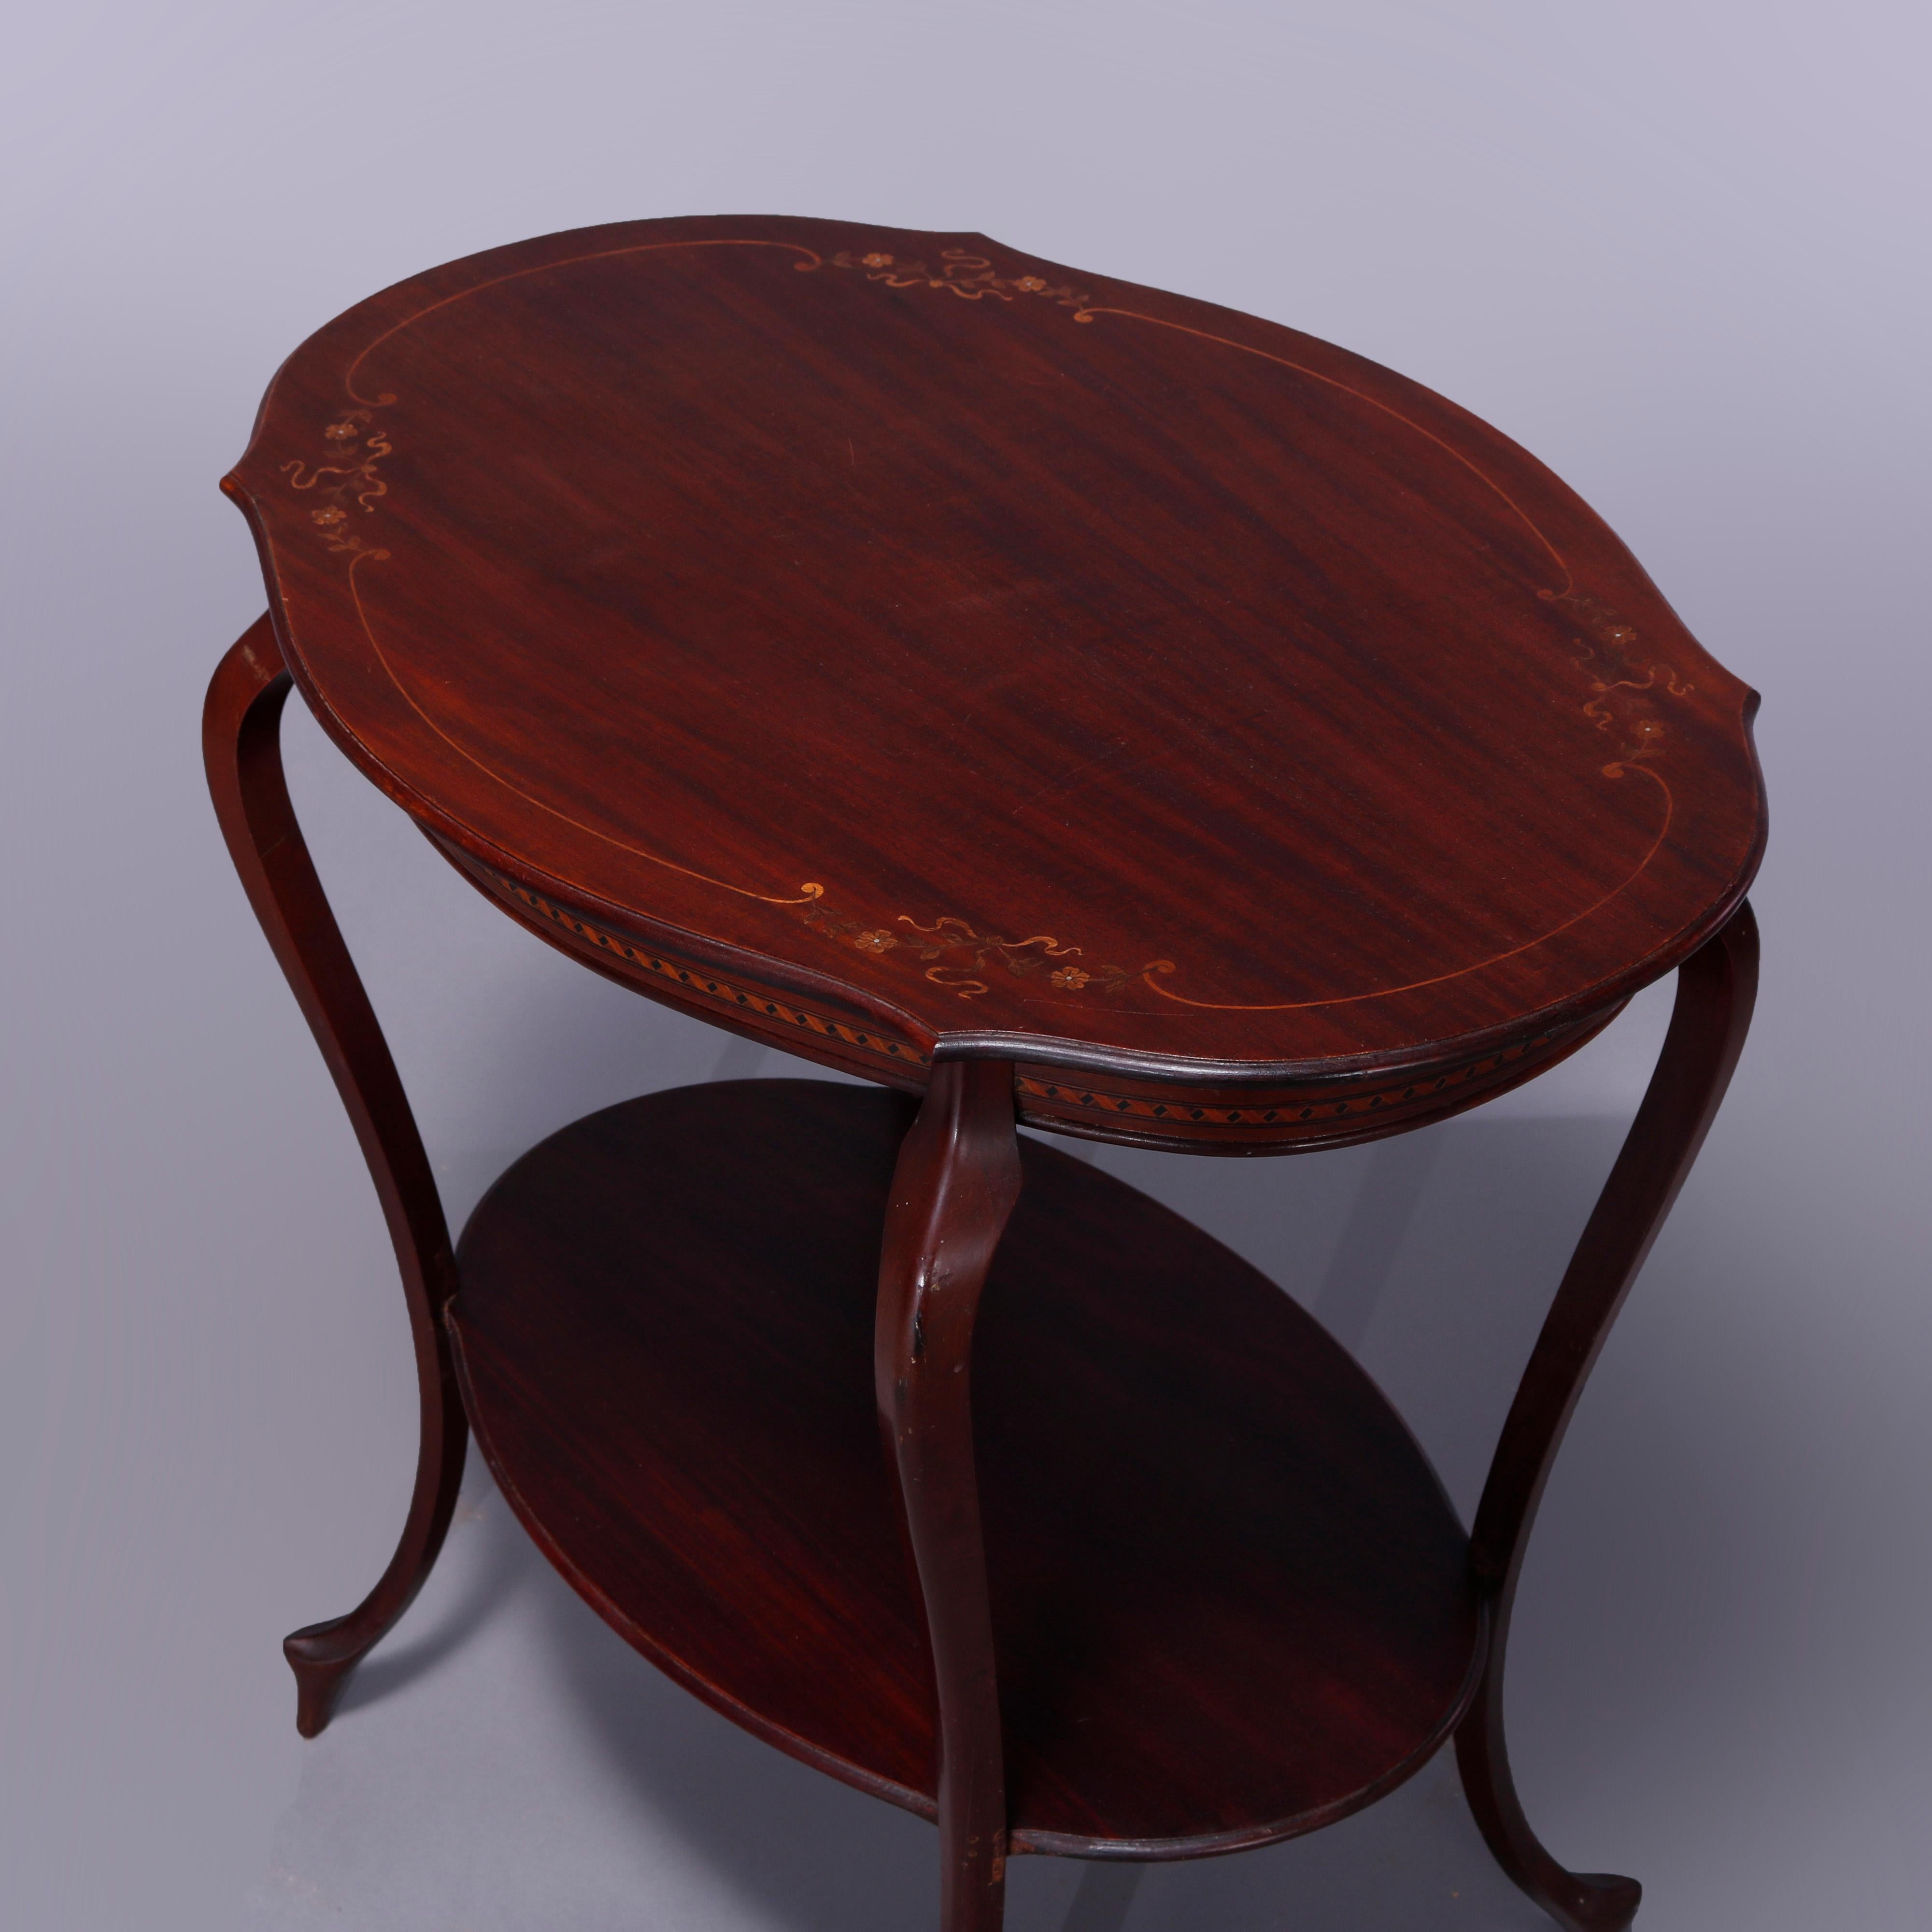 An antique French style parlor table offers mahogany construction with shaped top having satinwood inlaid floral and foliate marquetry inlay, raised on cabriole legs with lower display shelf, c1900

Measures - 30.25